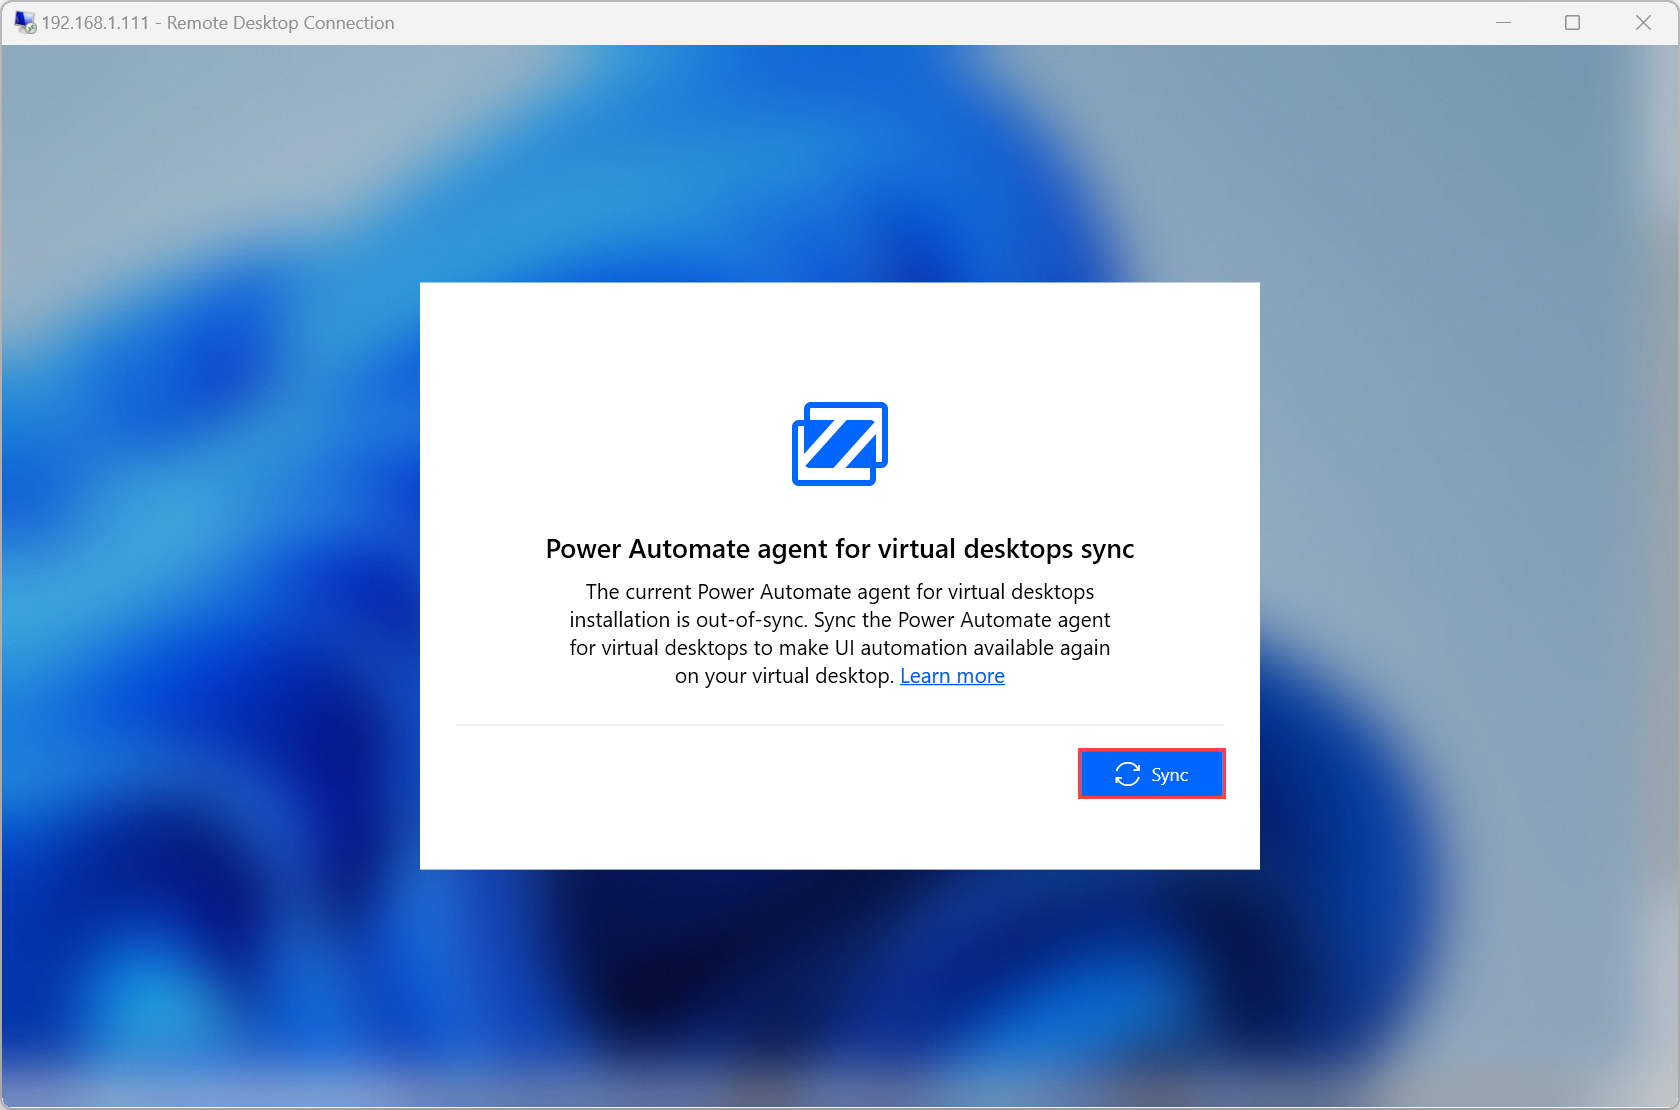 Screenshot of the prompt to sync Power Automate and Power Automate agent for virtual desktops.